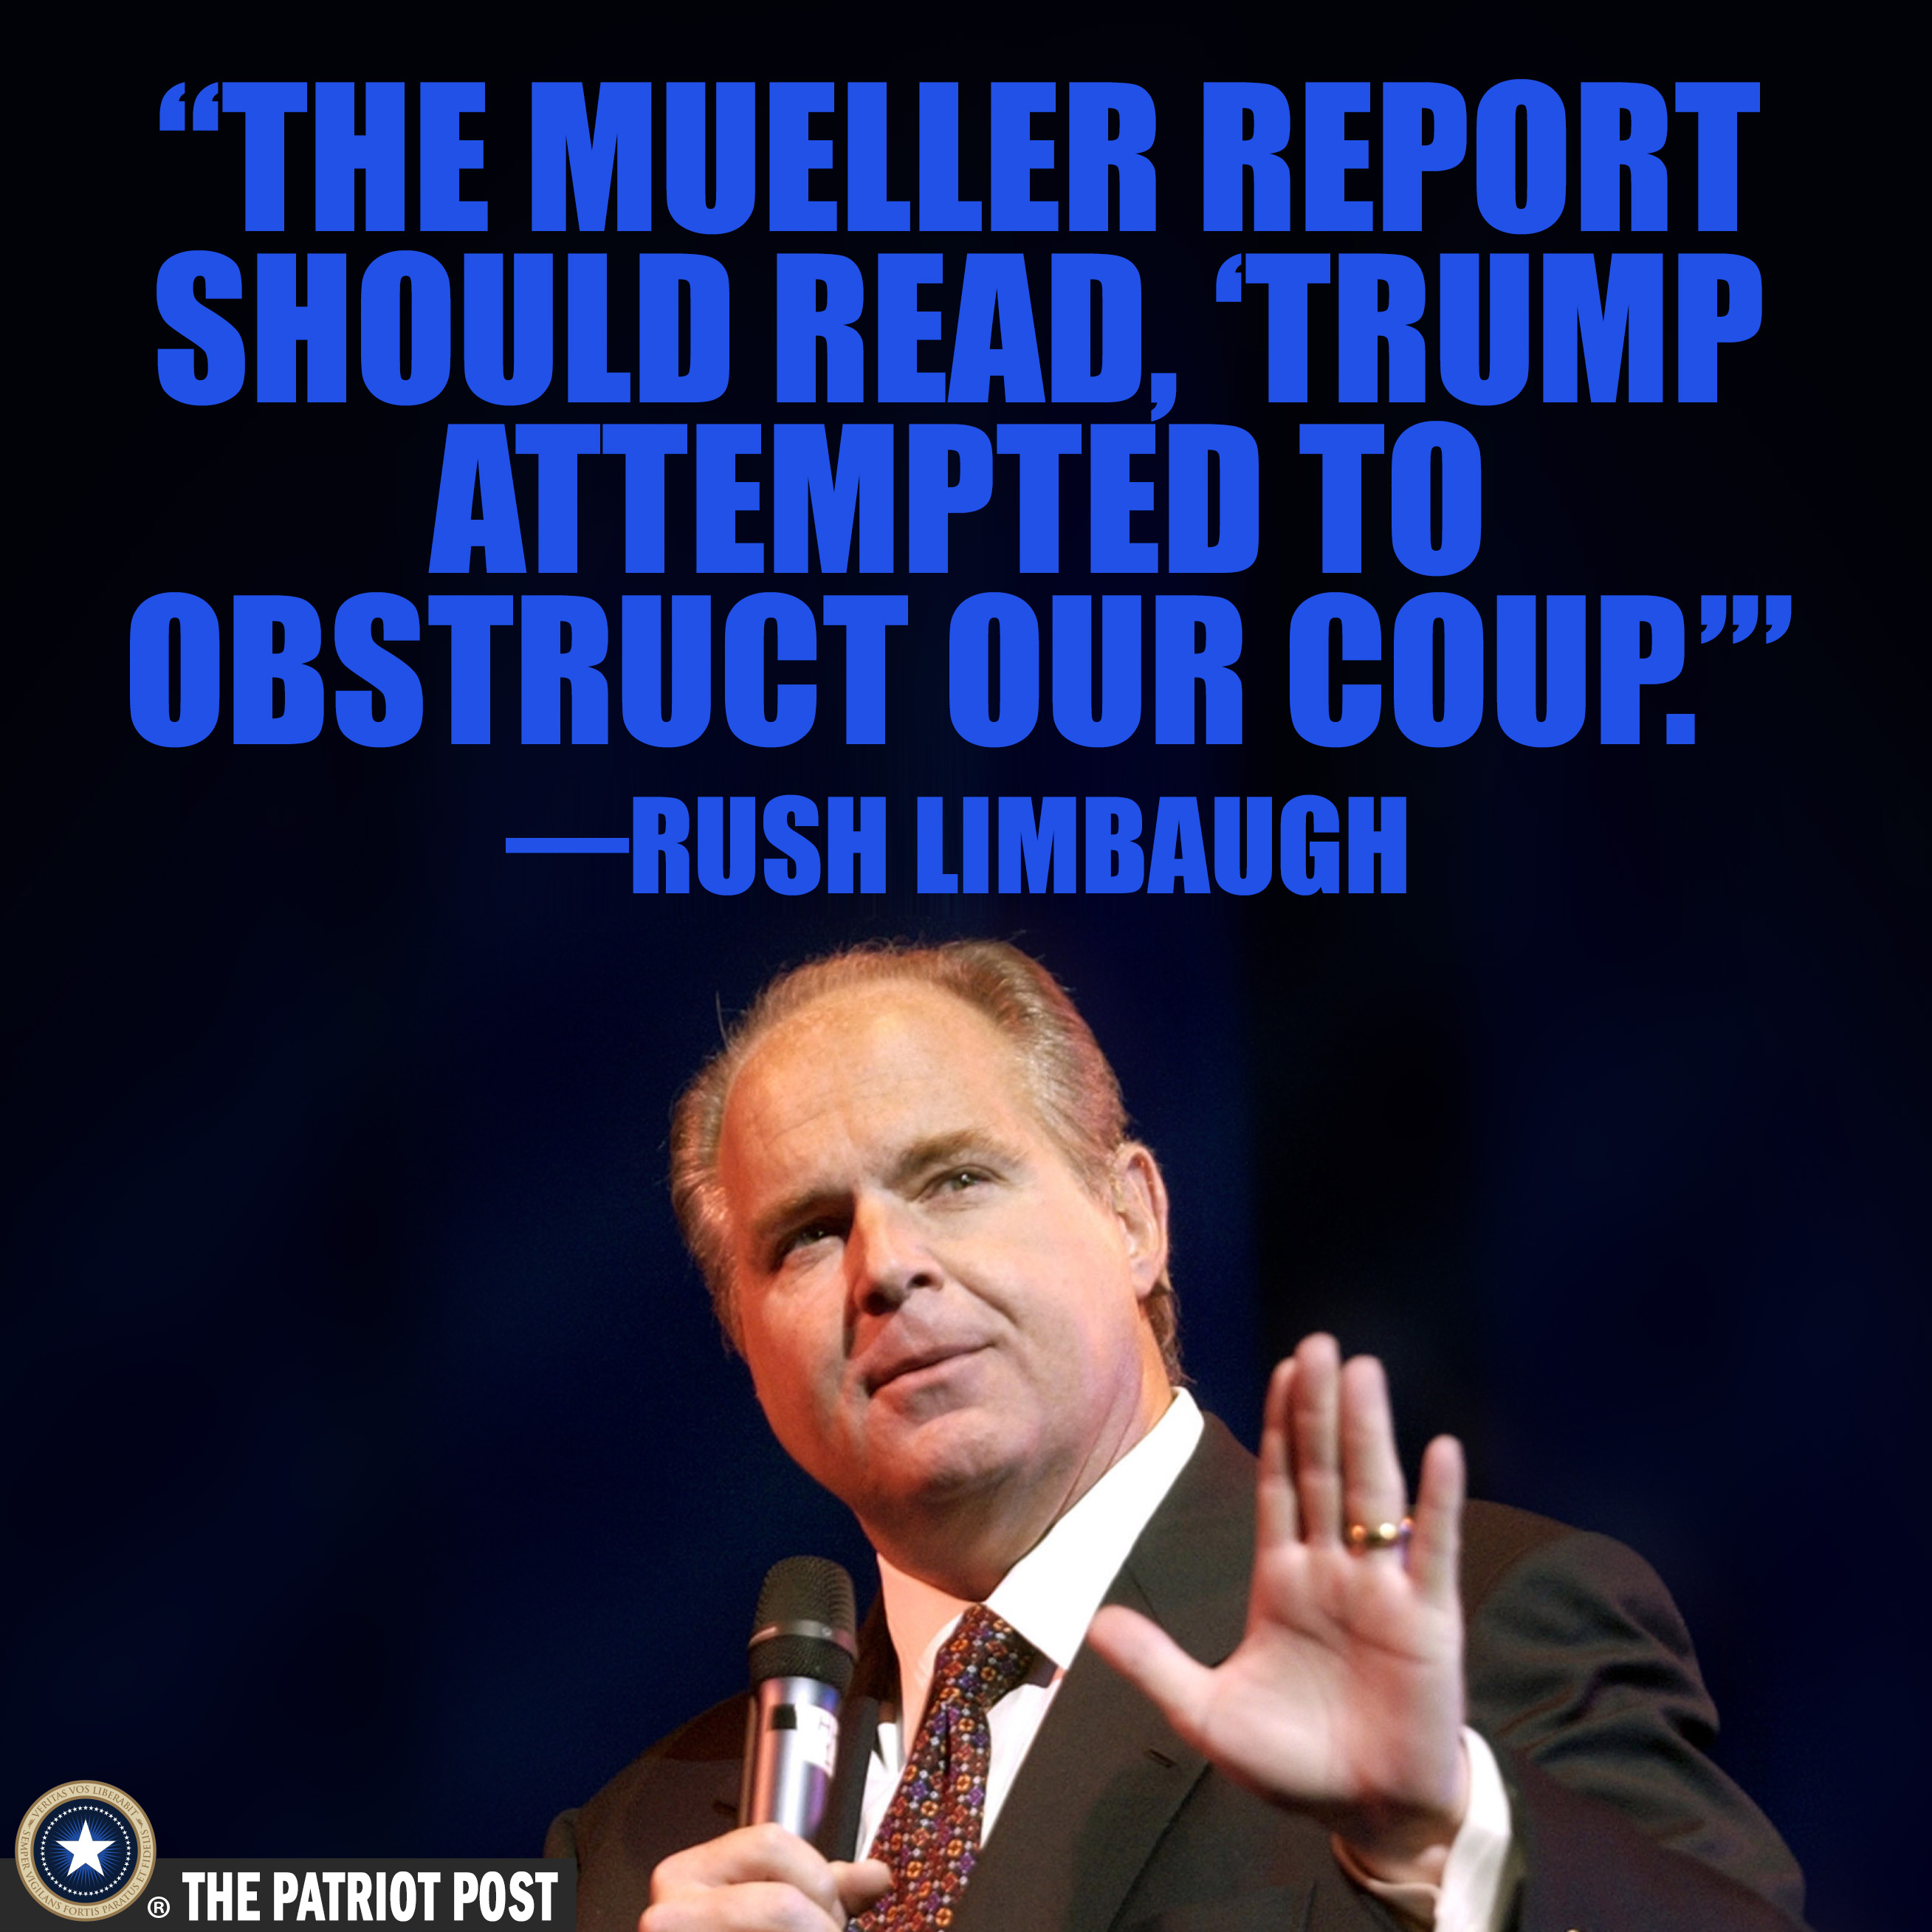 Conservative memes - public speaking - "The Mueller Report Should Read, Trump Attempted To Obstruct Our Coup." Rush Limbaugh The Patriot Post